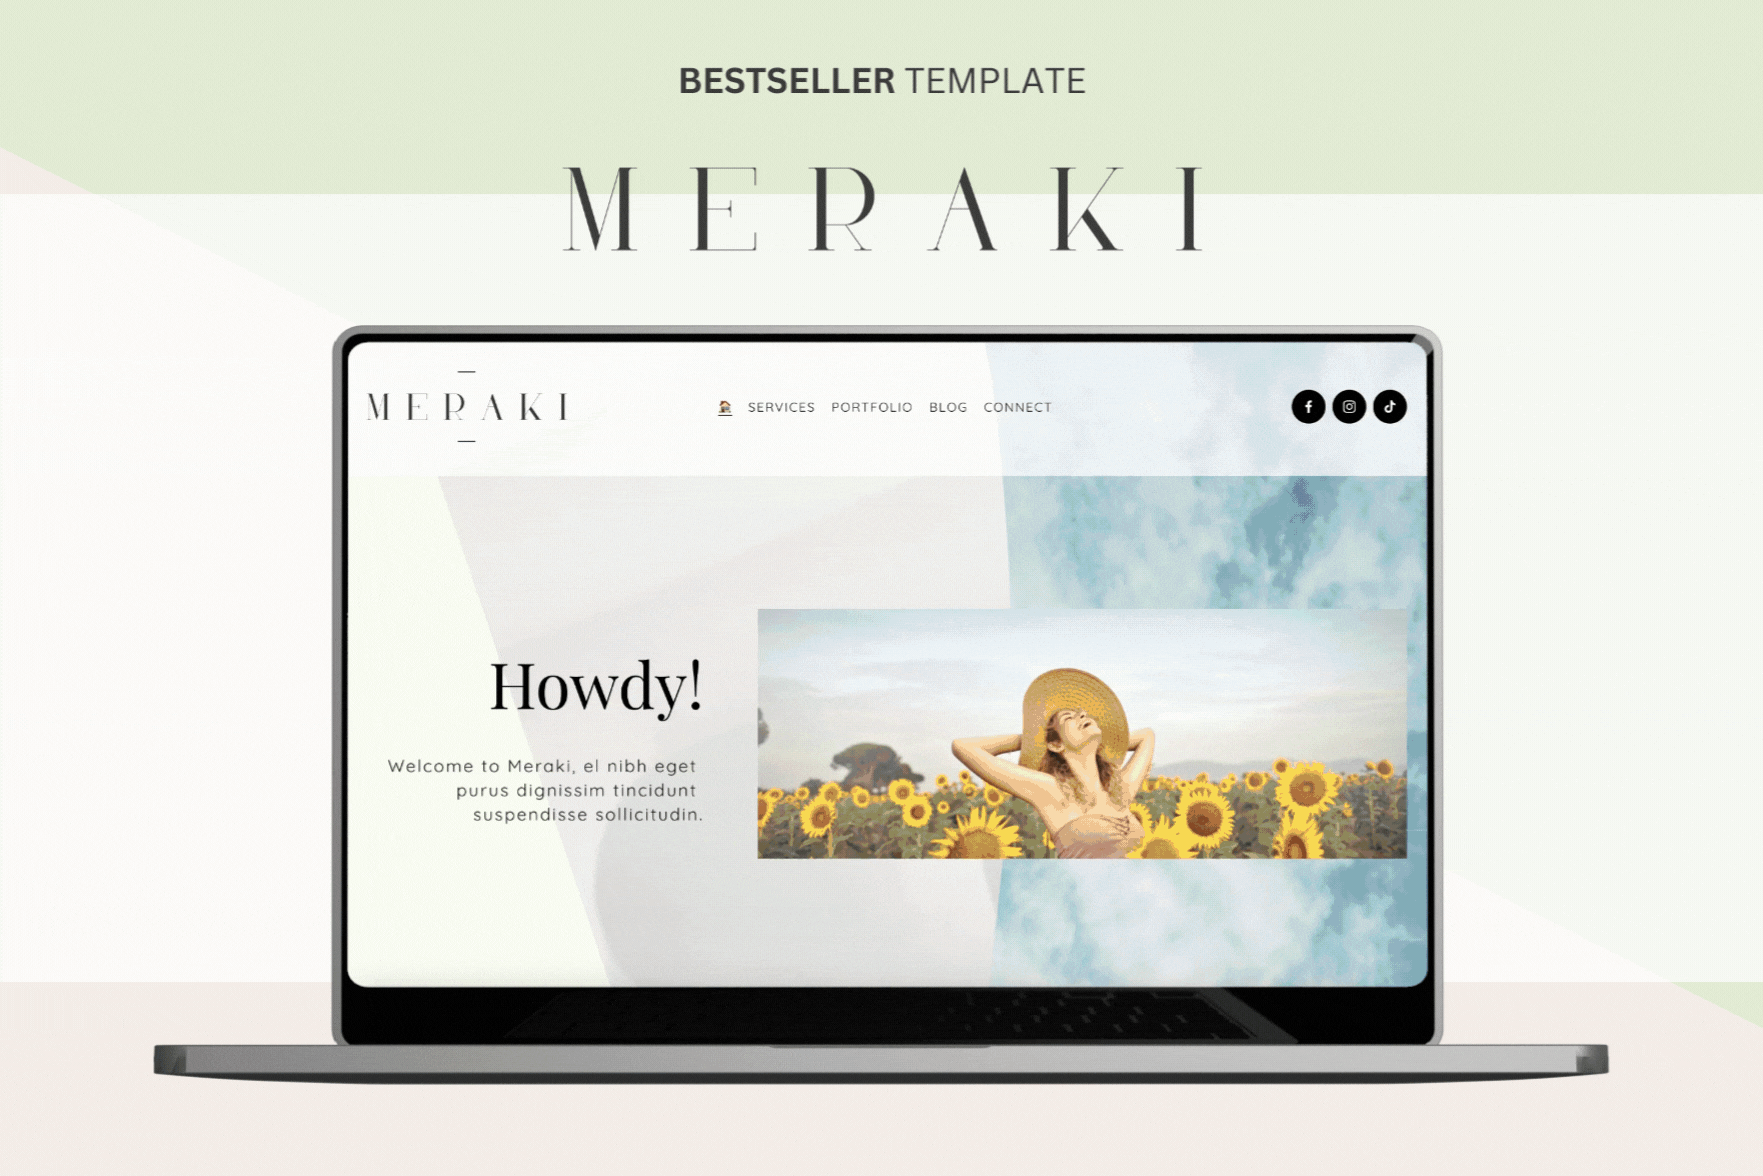 A website made with one of the affordable Squarespace templates called Meraki